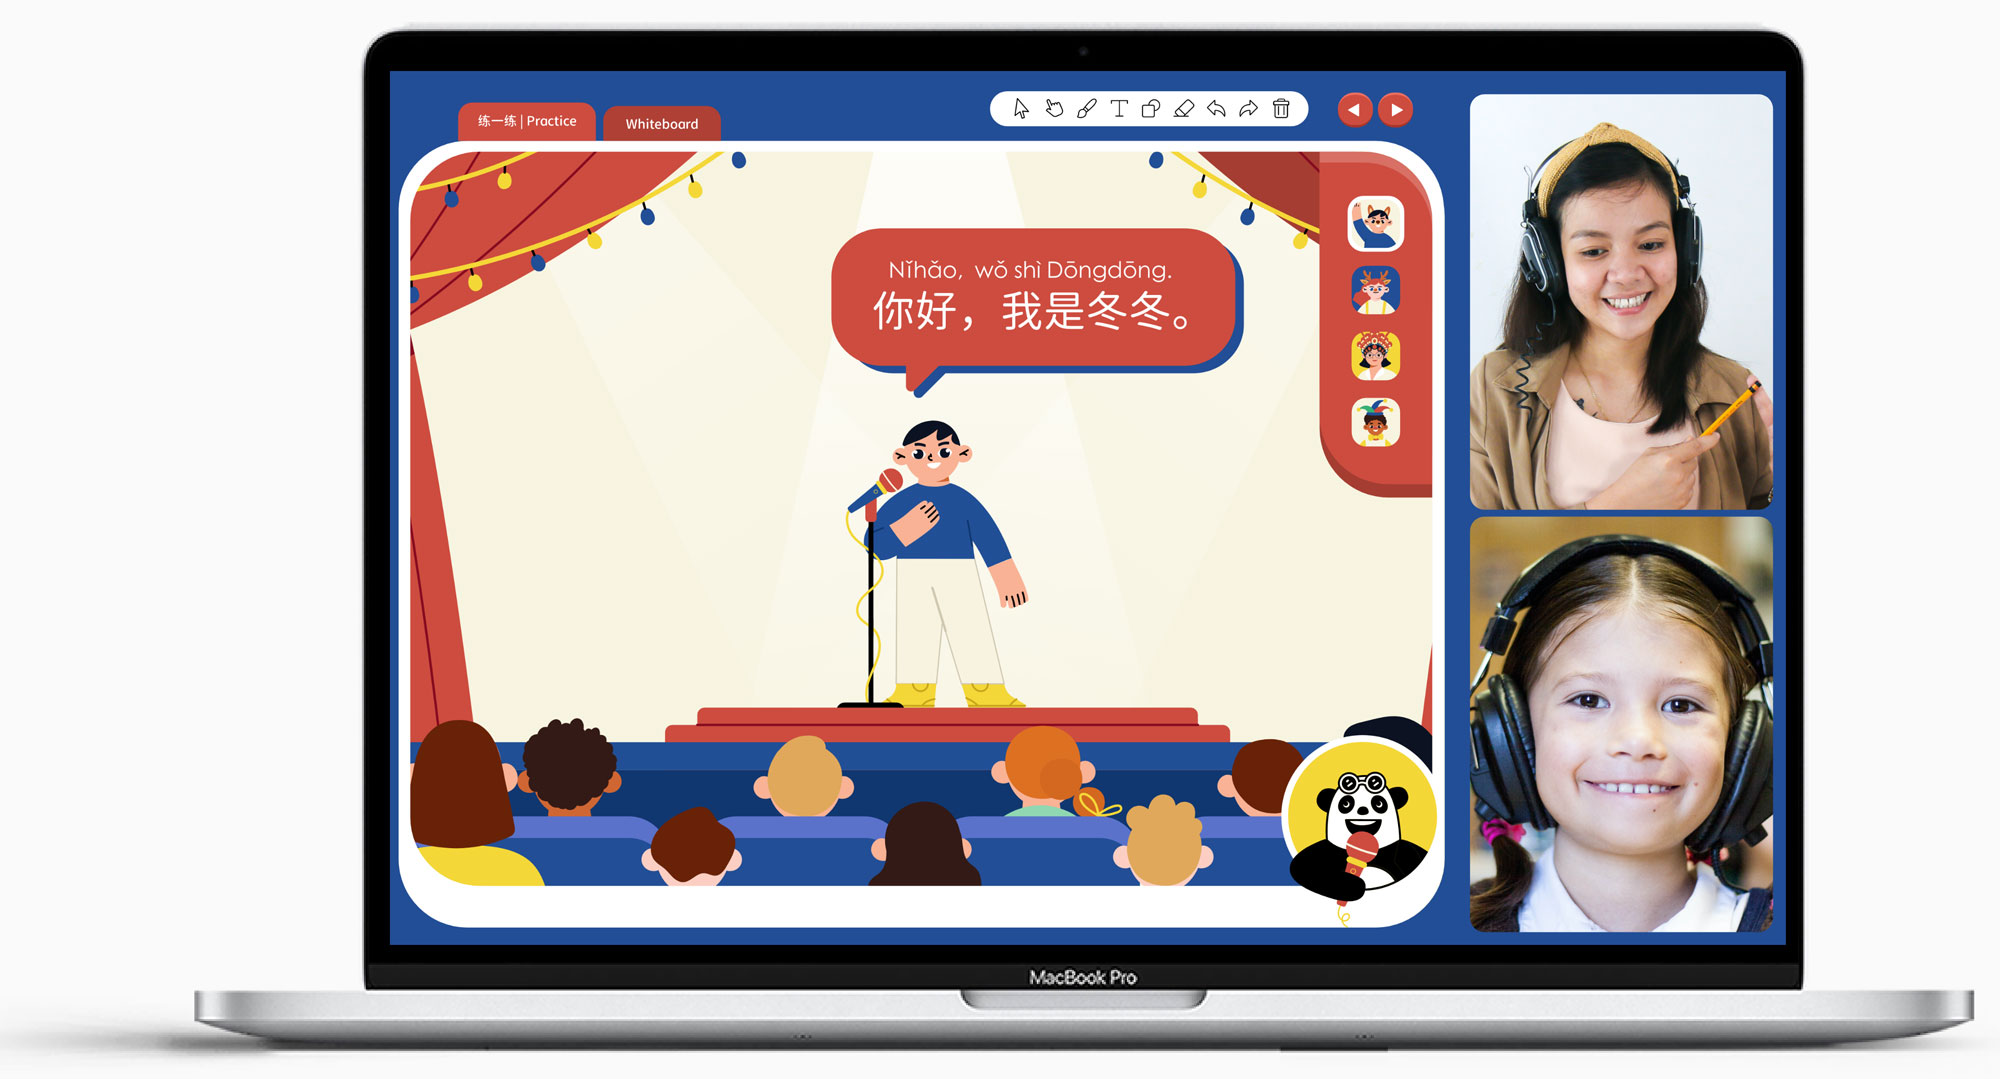 Learn Chinese with NihaoKids